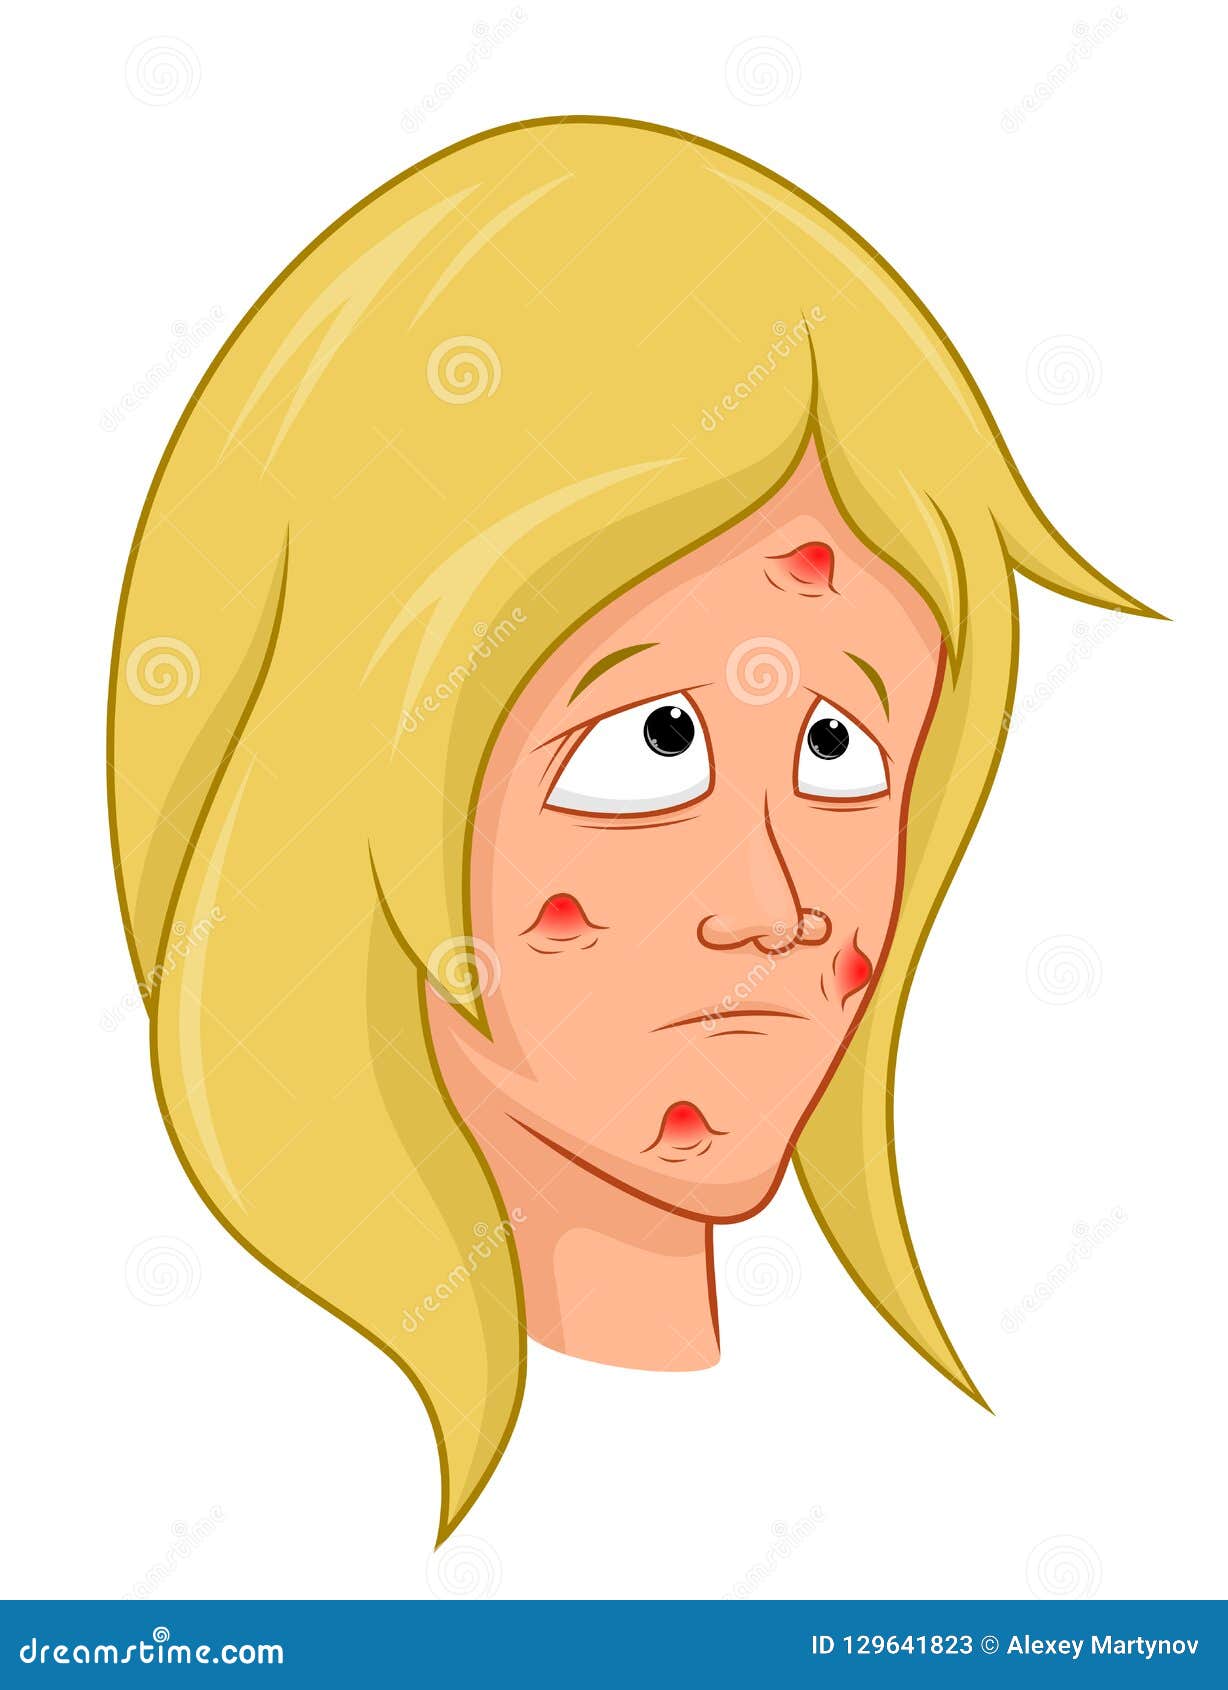  Cartoon  girl with acne  stock vector Illustration of 